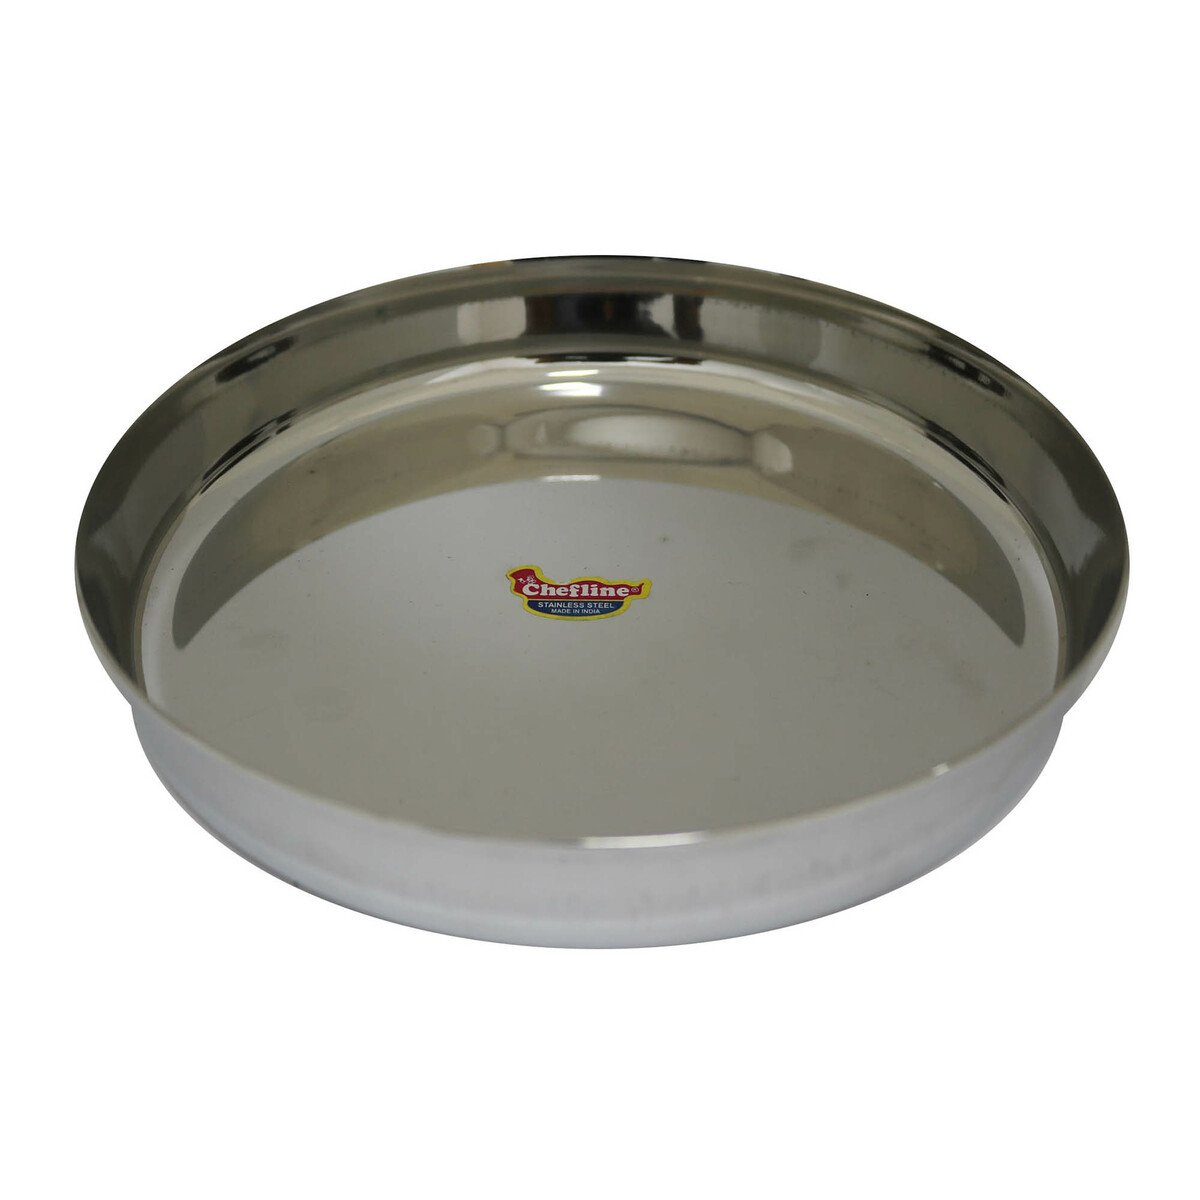 Chefline Stainless Steel Binding Thali No.10 Ind